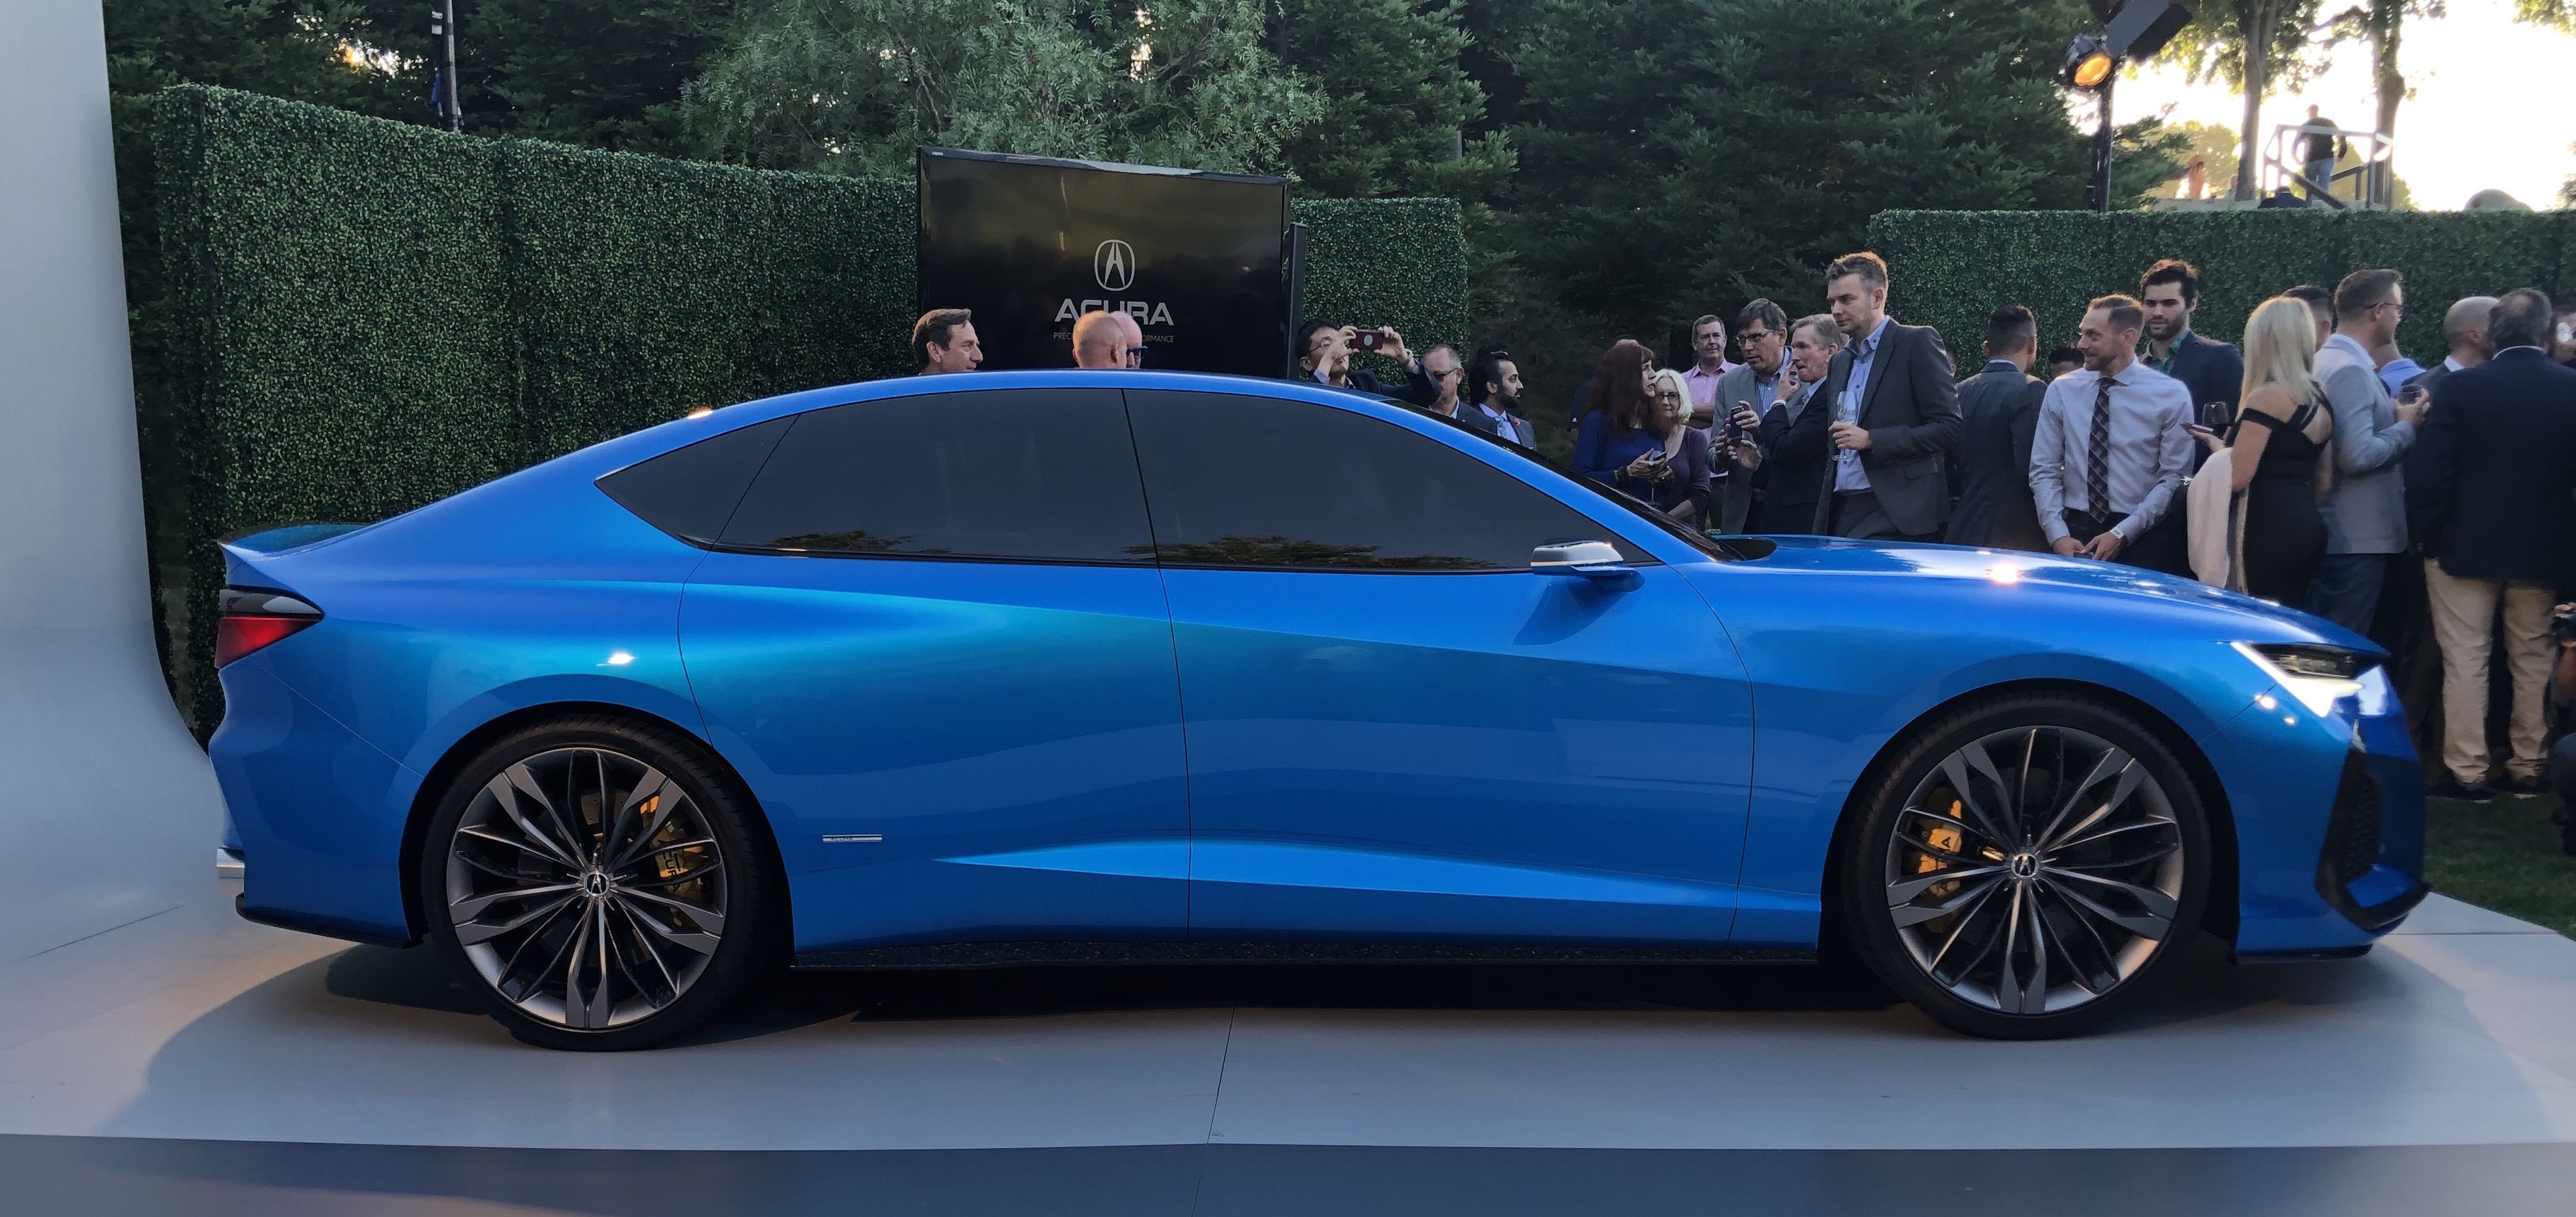 Acura Type S Concept Is An Exciting Preview Of Future Performance